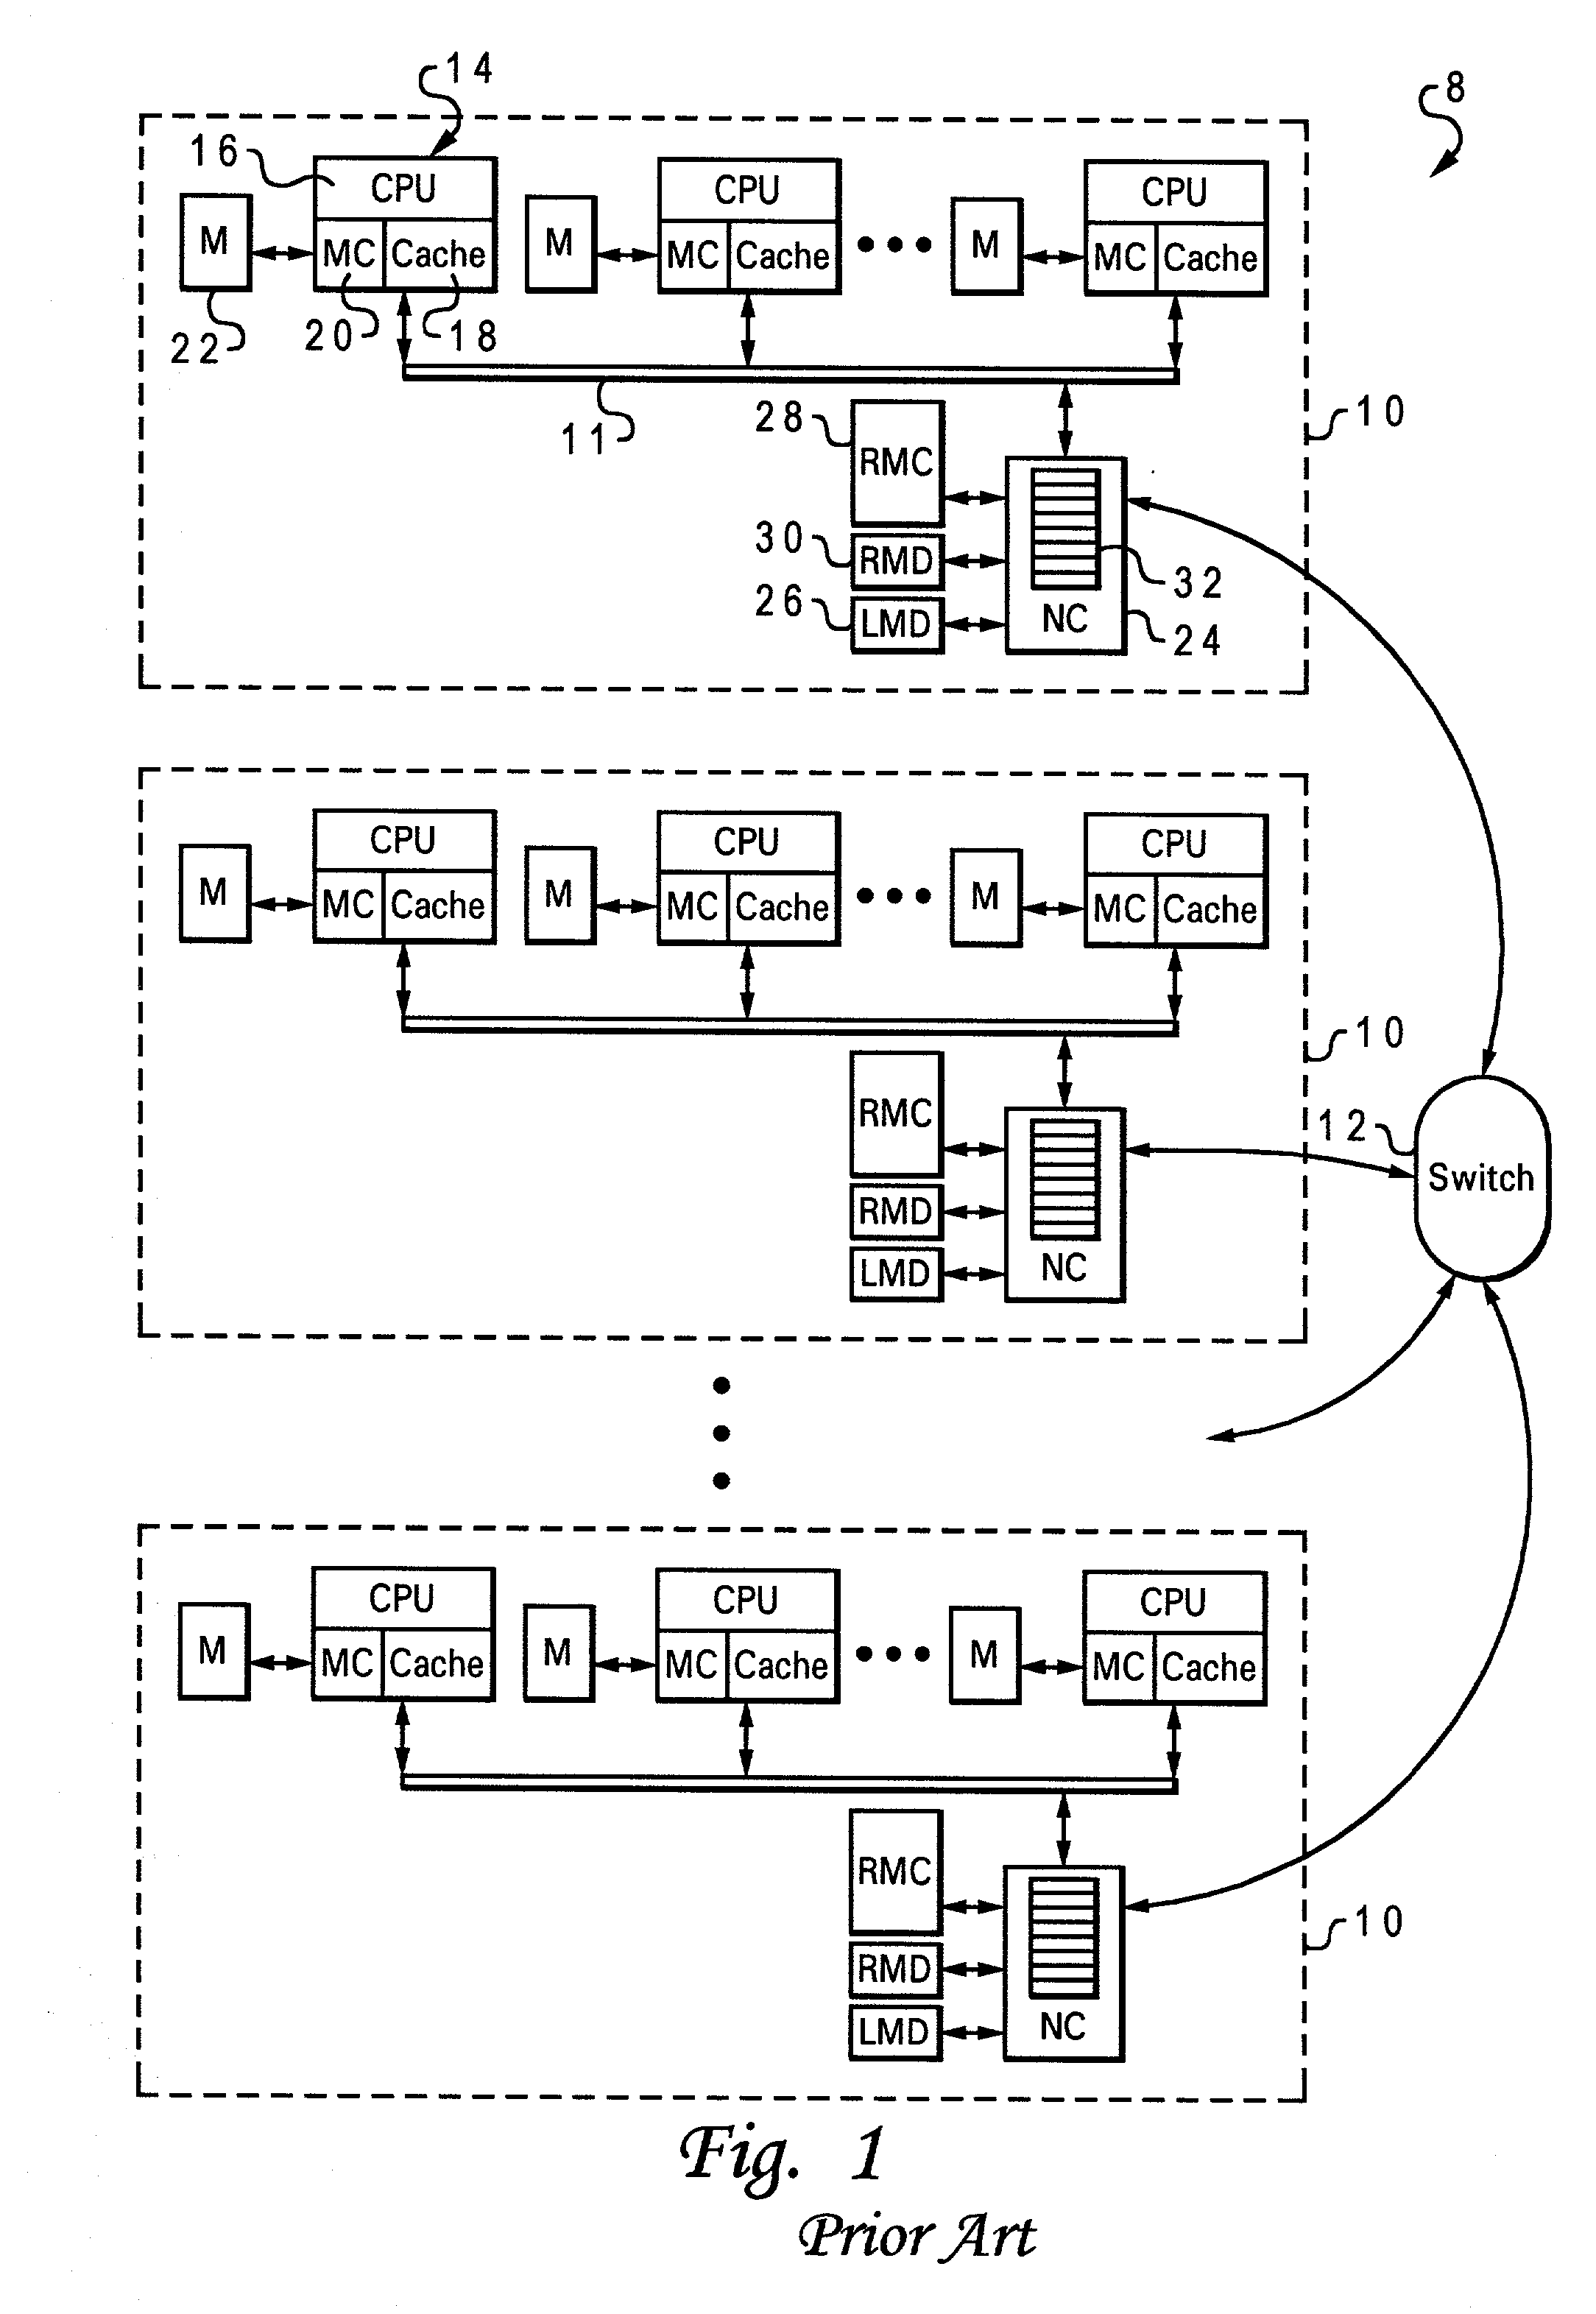 Method and system for prefetching utilizing memory initiated prefetch write operations